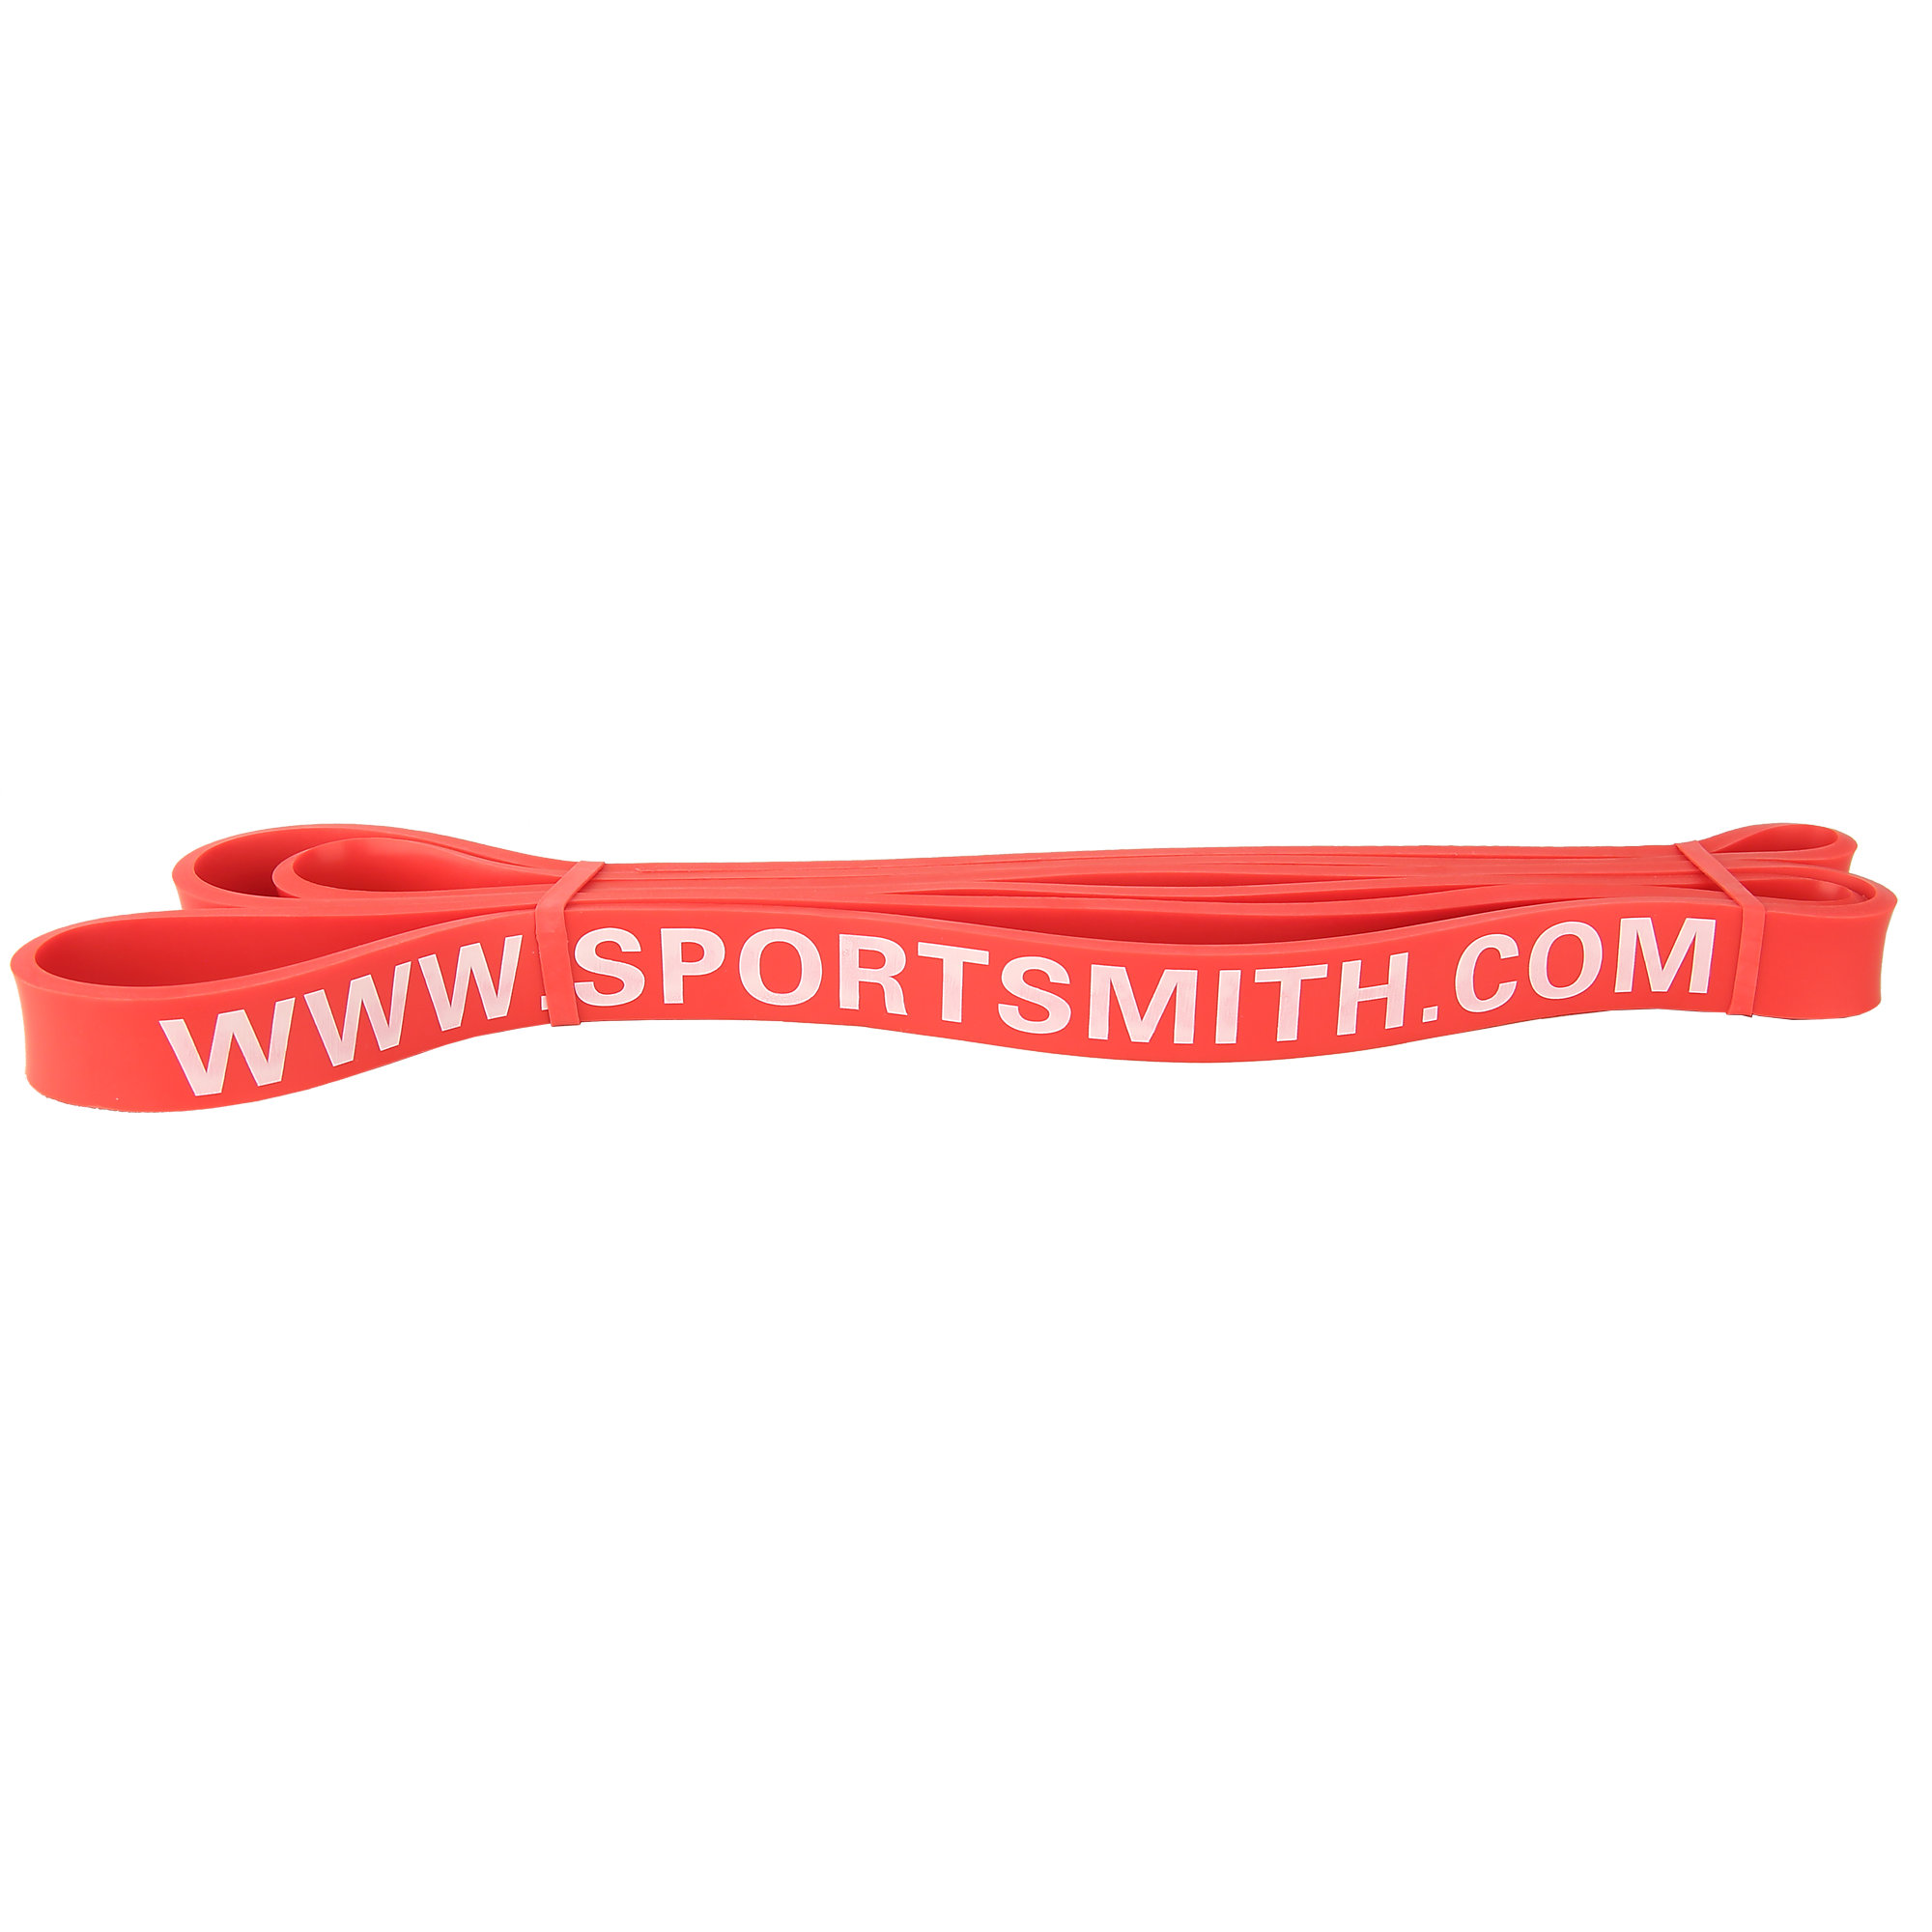 XSmall Power Resistance Band by Sportsmith, 41", Red